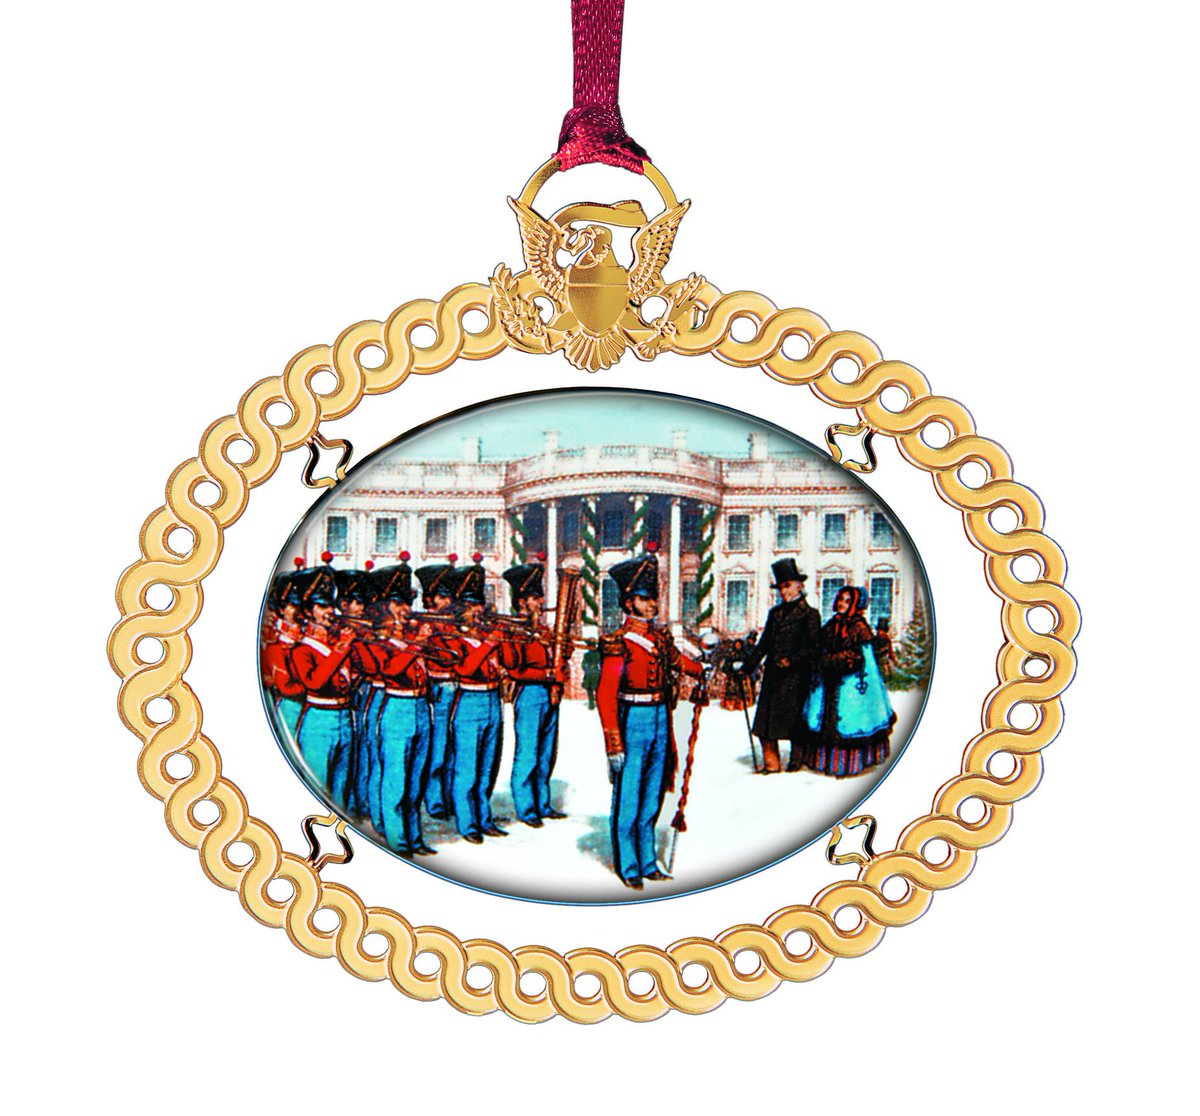 President James K. Polk and First Lady Sarah Polk are being serenaded by the United States Marine Band in the 1994 White House Christmas Ornament. The tradition of regularly playing "Hail to the Chief" began during the Polk era. https://shop.whitehousehistory.org/holidays/ornaments/1994-to-1997-white-house-christmas-ornaments-sold-as-a-set-of-four